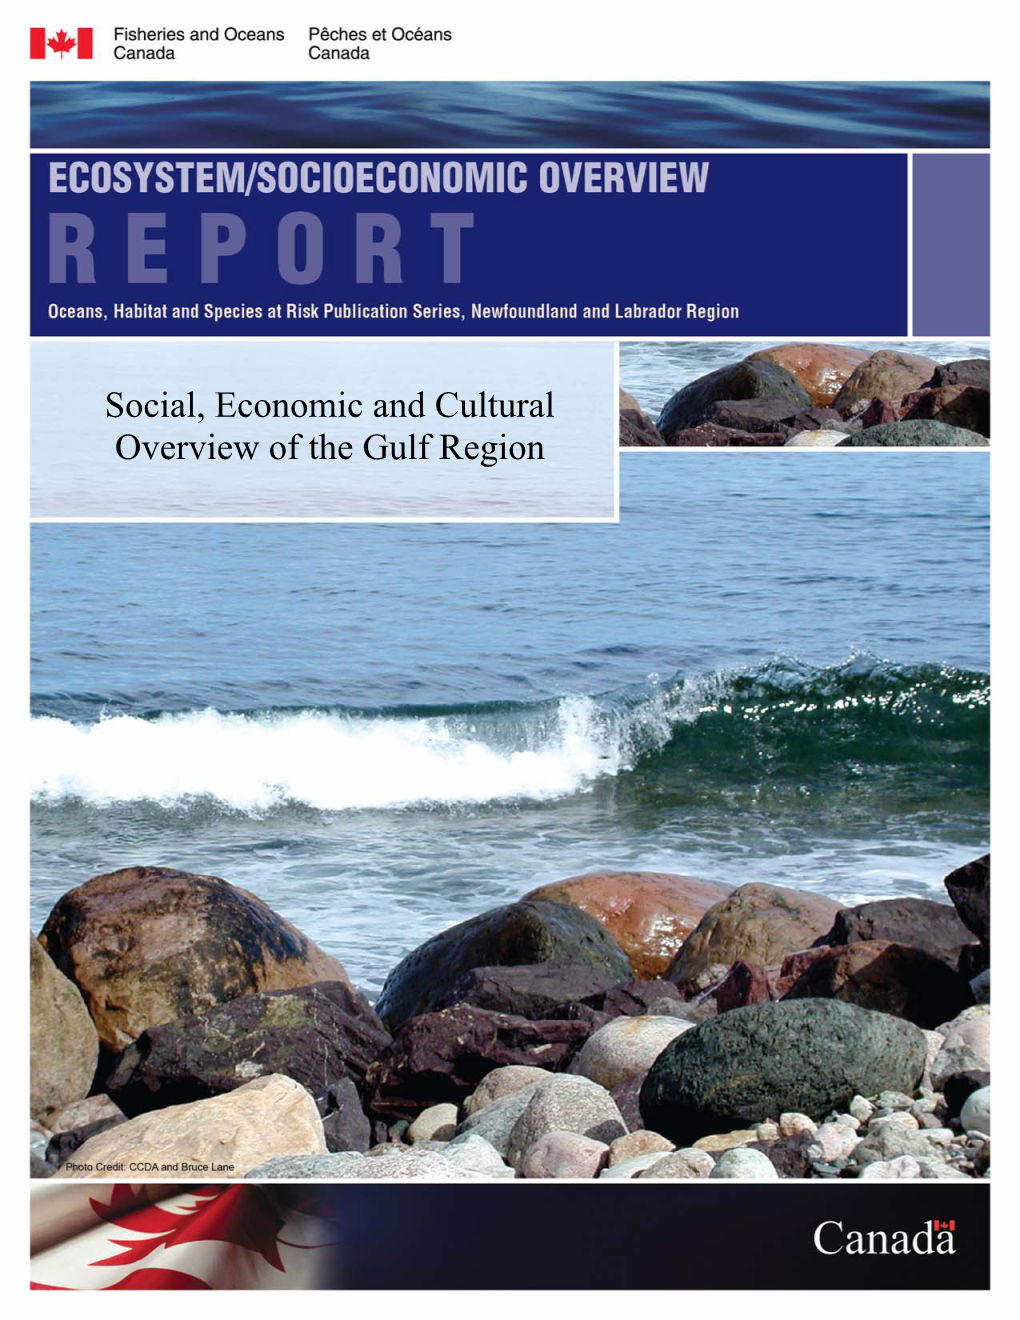 Social, Economic and Cultural Overview of the Gulf Region